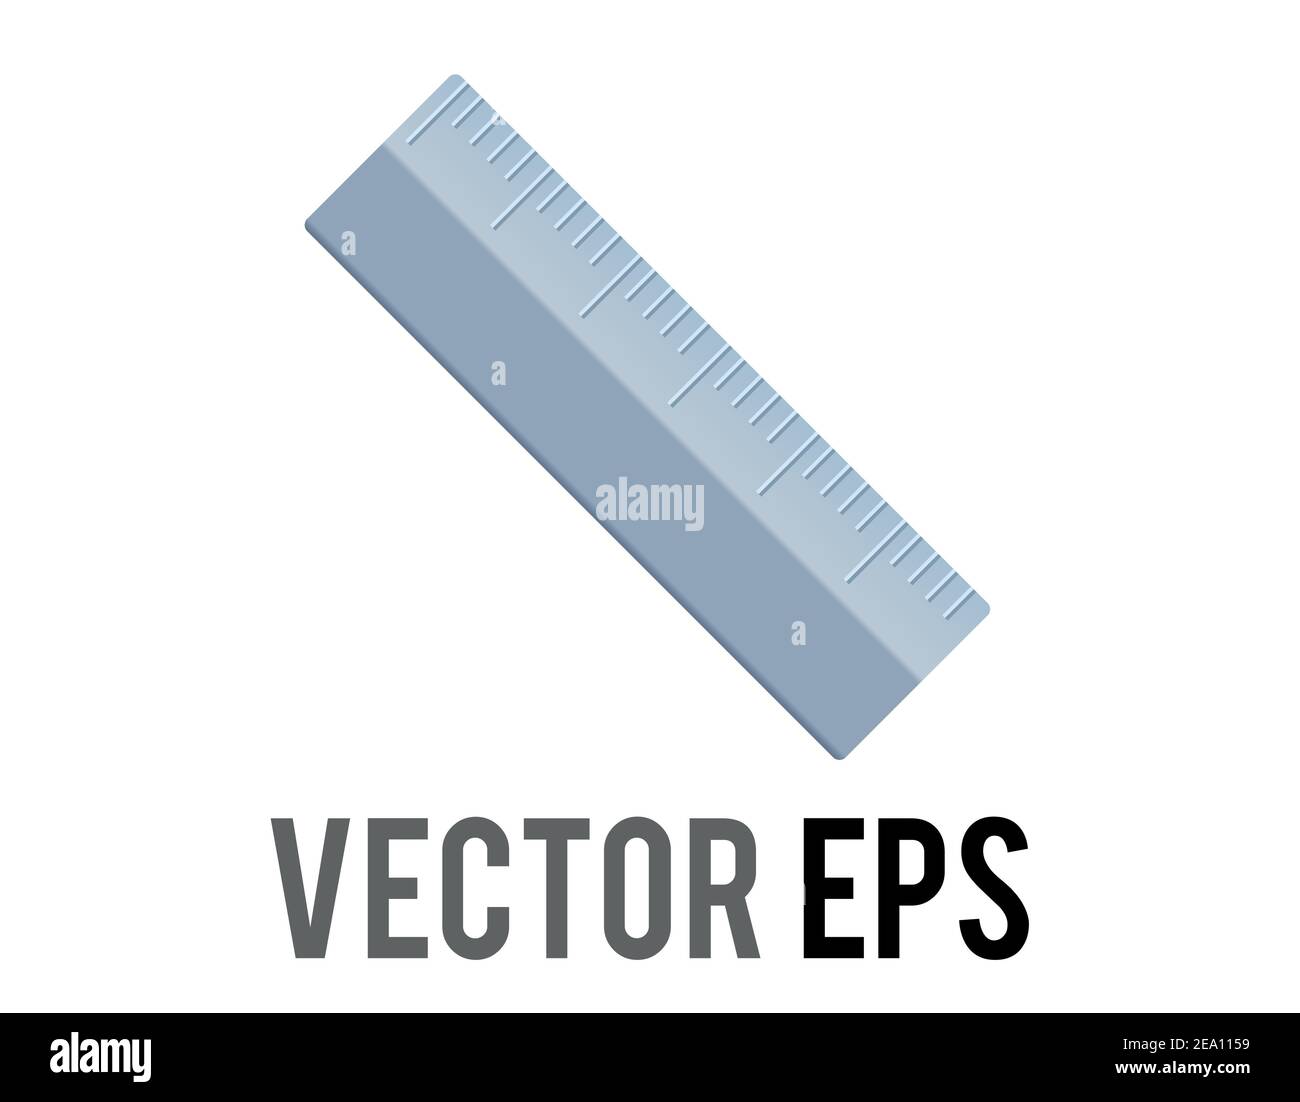 The isolated vector silver metal straight ruler icon, as used to draw lines and measure distance, used for content concerning schooling, building and Stock Vector